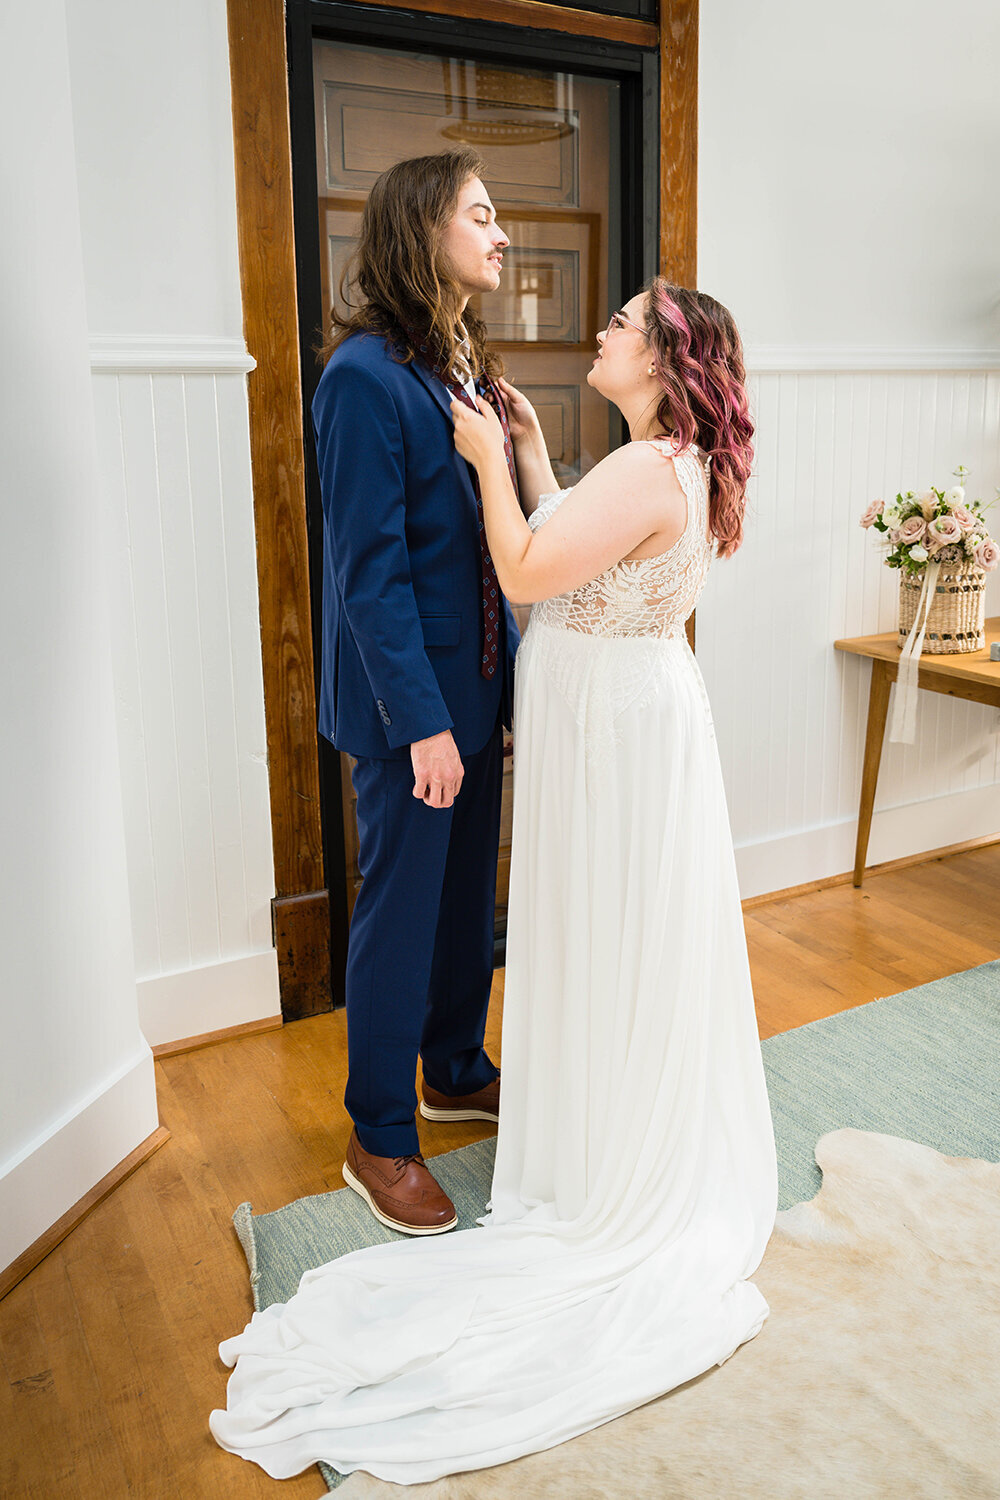 A marrier drapes her partner’s tie over his shoulder and pulls him in close as the two get ready together for their elopement in a hotel room at Fire Station One in Roanoke, Virginia.